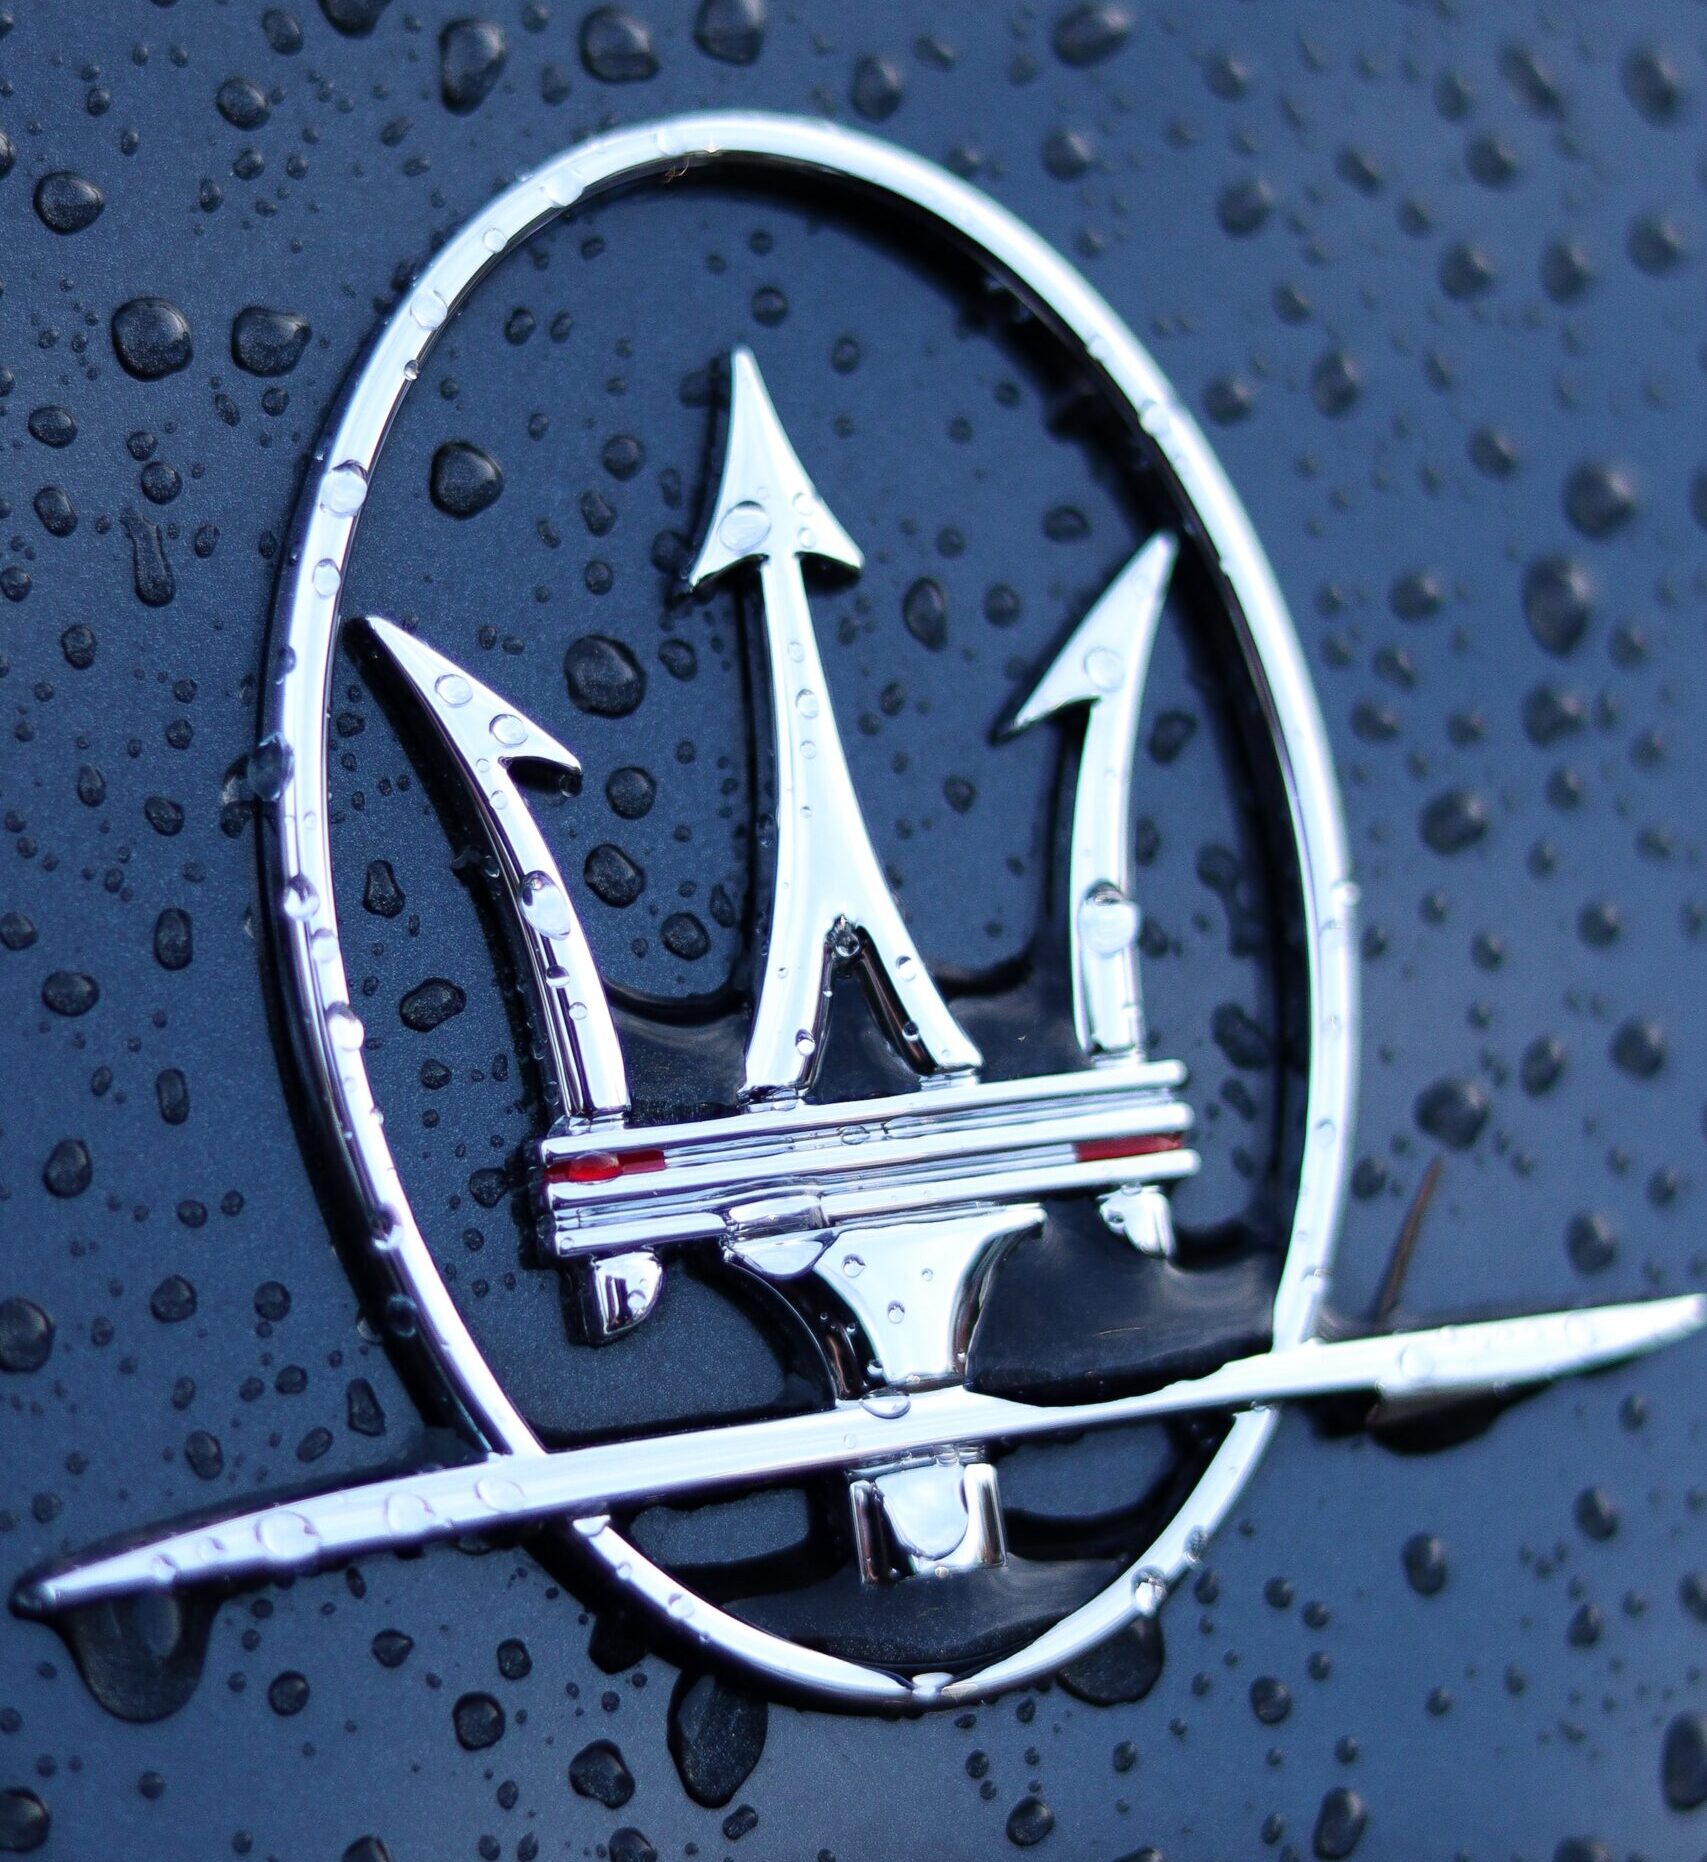 Close-up of the Maserati Trident logo, surrounded by water droplets. The photo highlights the logo's intricate details and the water's reflective qualities.